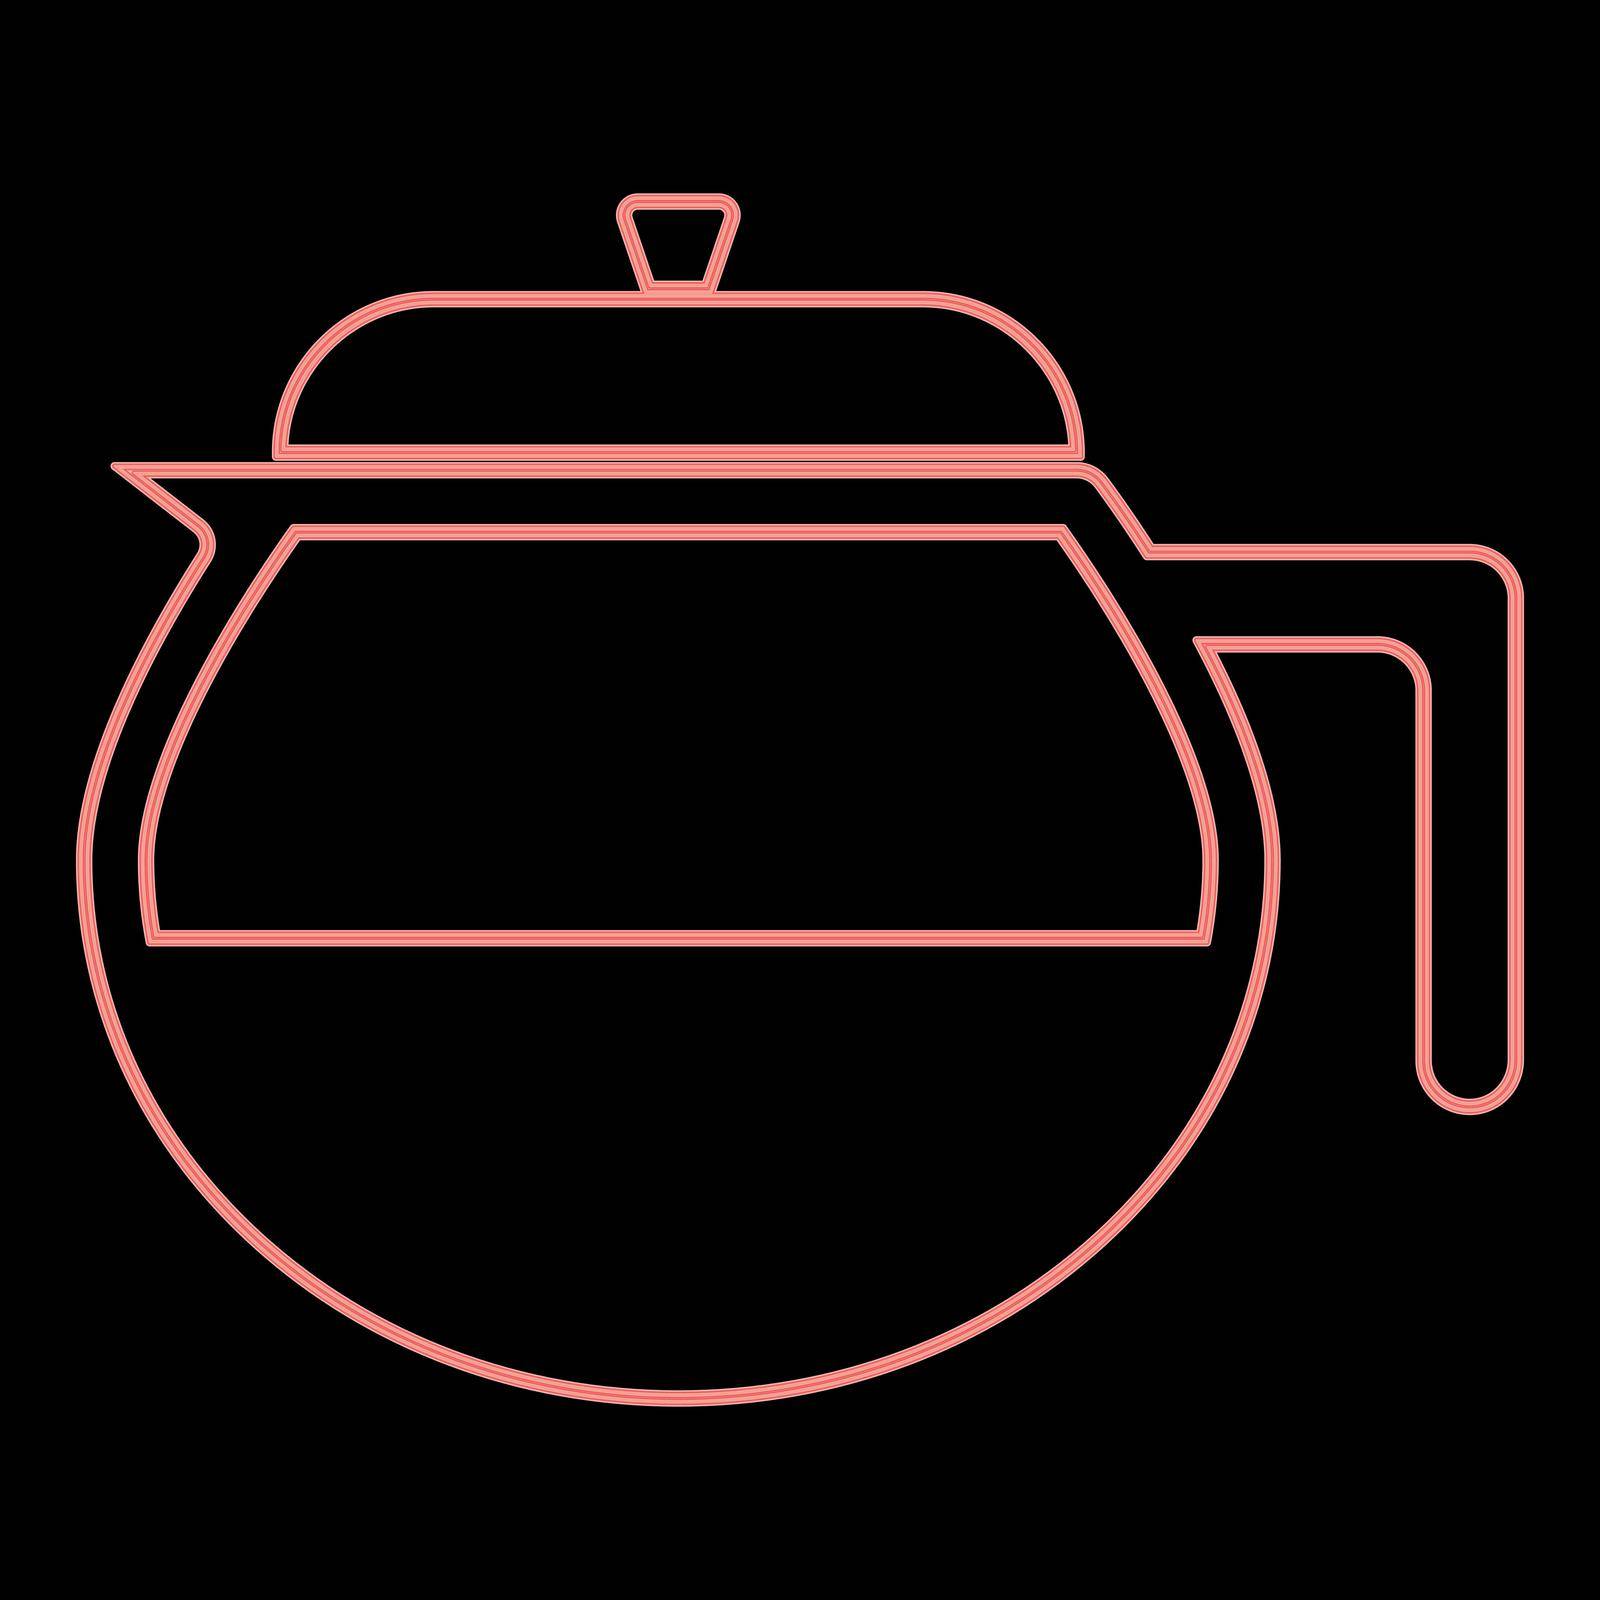 Neon teapot the red color vector illustration flat style image by serhii435